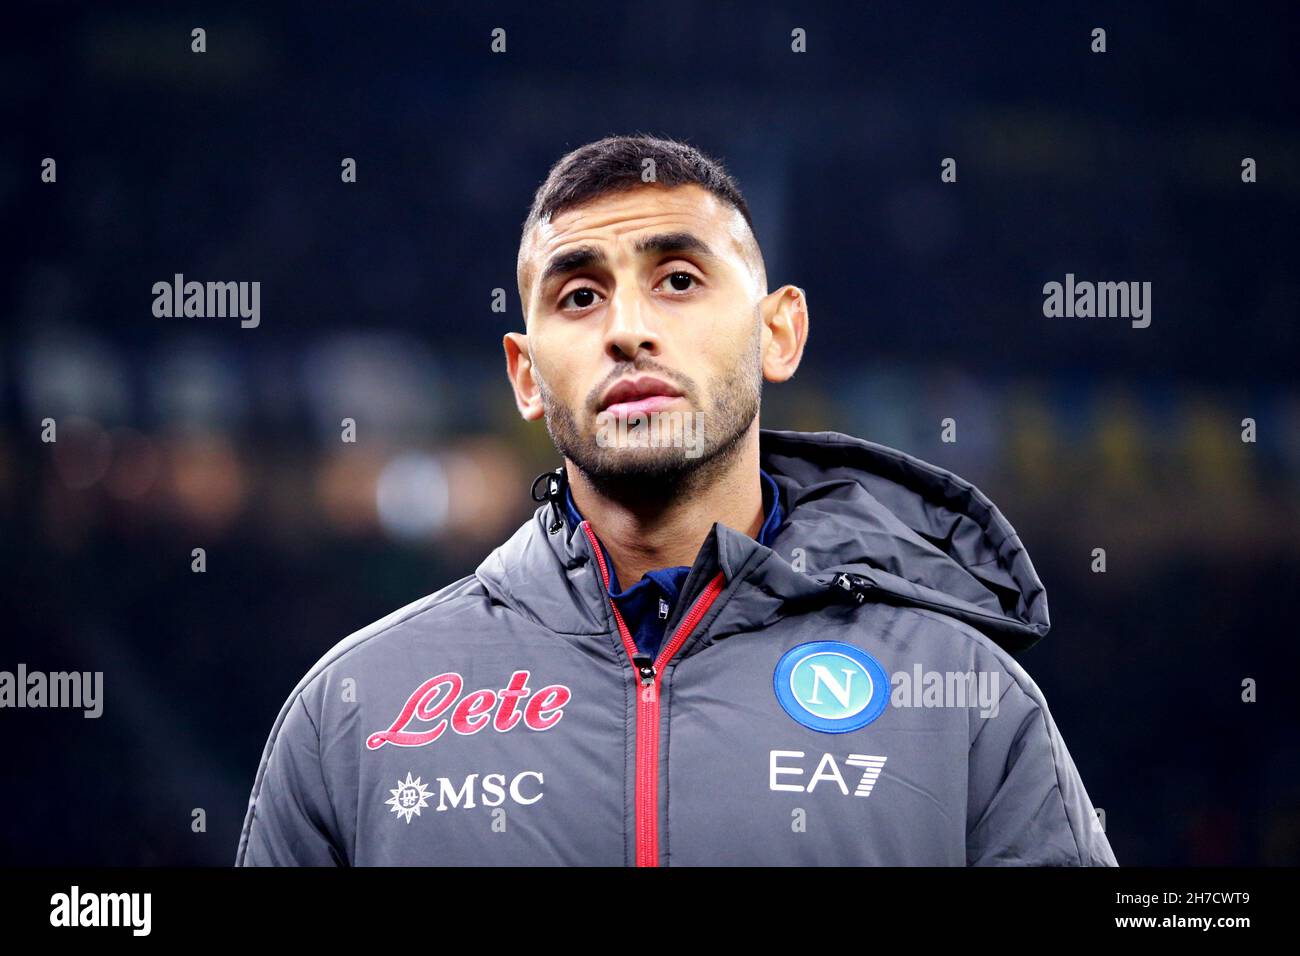 Faouzi Ghoulam of Ssc Napoli  looks on during the Serie A match between Fc Internazionale and Ssc Napoli. Stock Photo